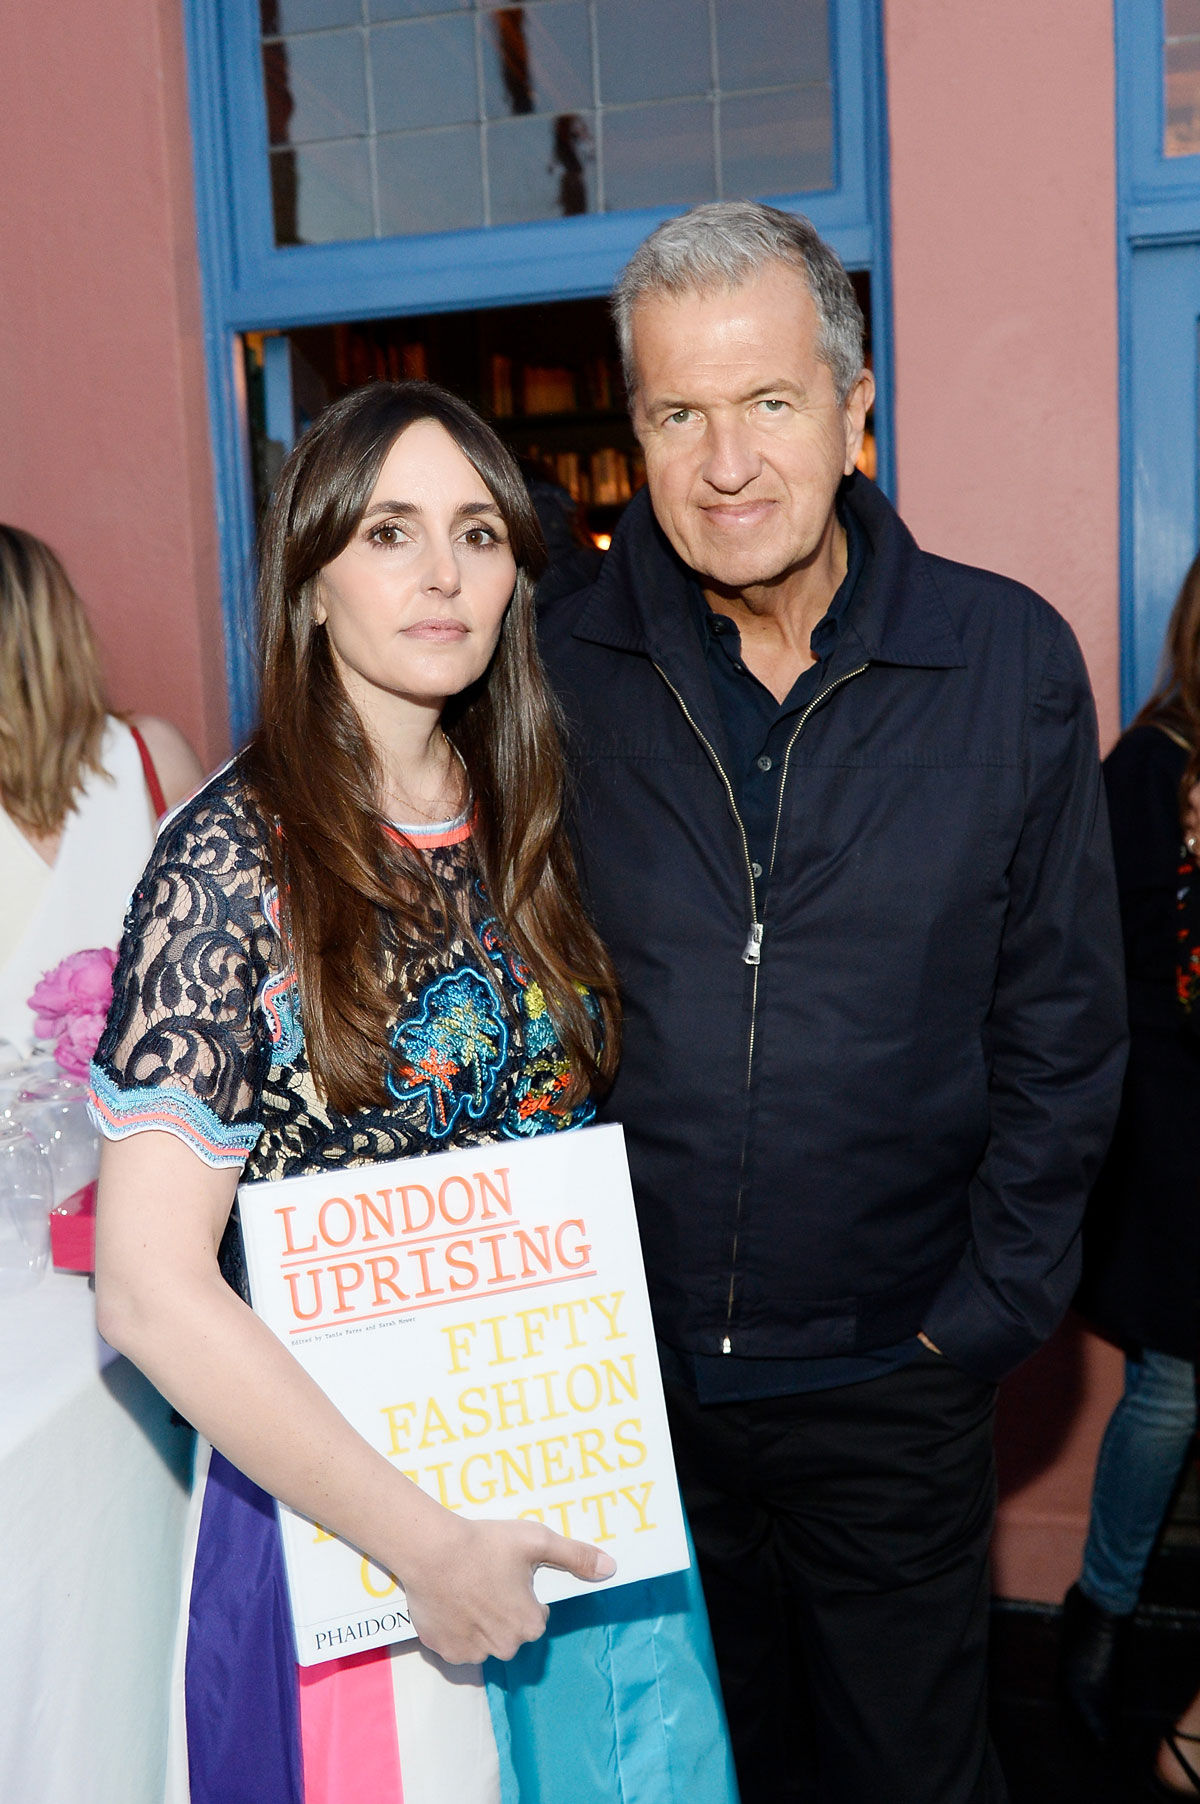 Tania Fares and Mario Testino celebrate the launch of London Uprising: Fifty Fashion Designers One City on April 18, 2017 in Los Angeles, California. (Photo by Stefanie Keenan/Getty Images for Tania Fares)